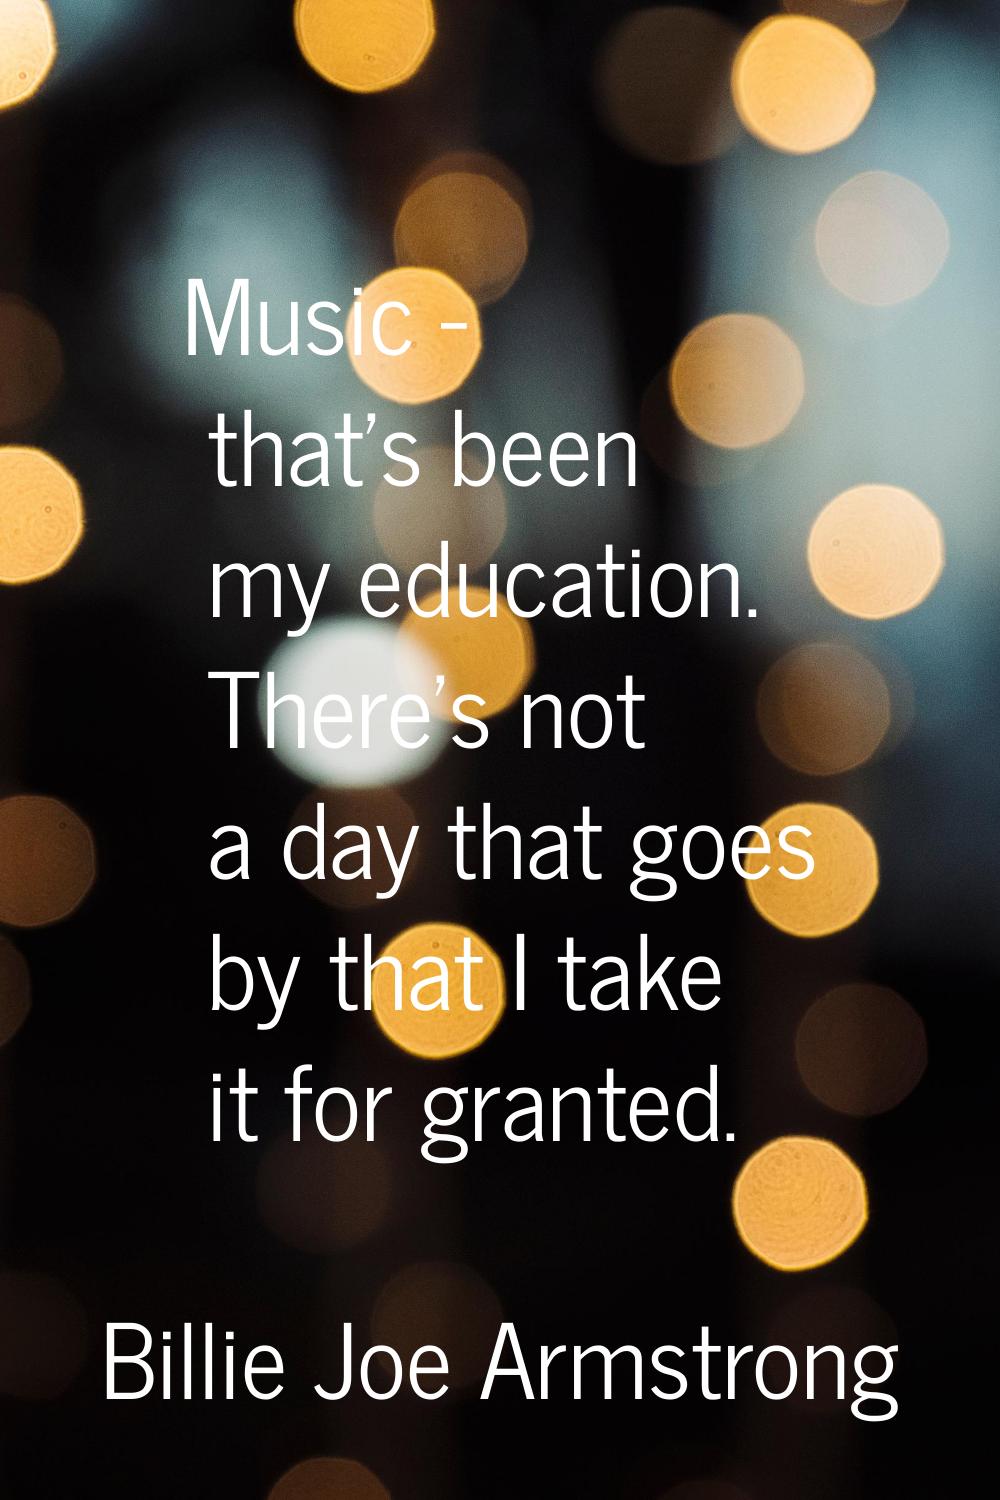 Music - that's been my education. There's not a day that goes by that I take it for granted.